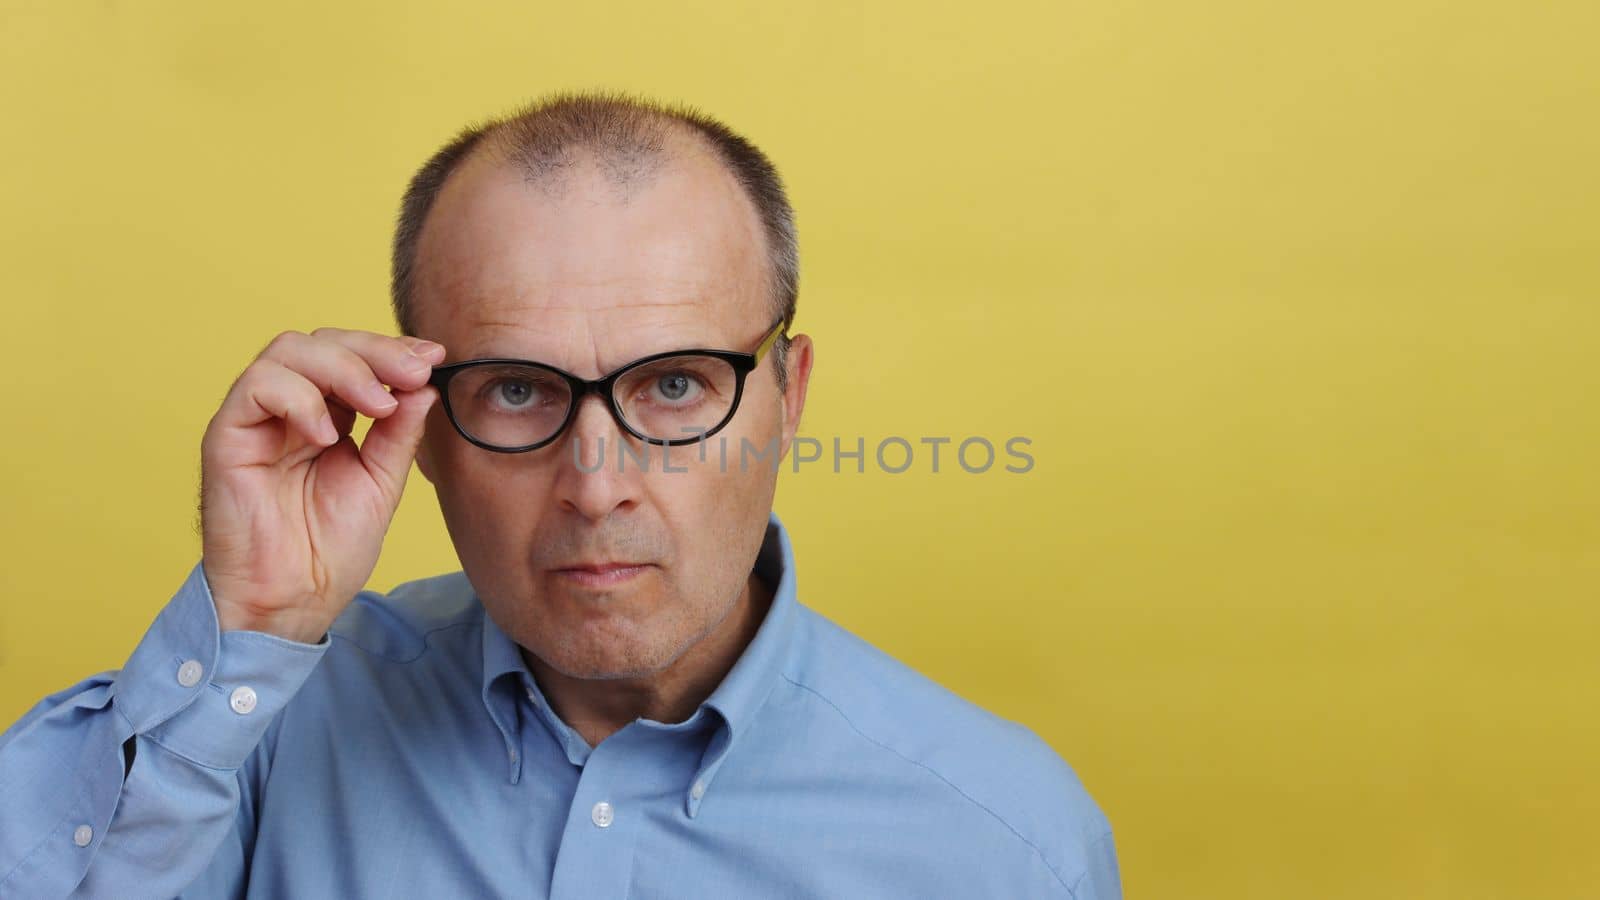 Handsome man with glasses on yellow background. by gelog67